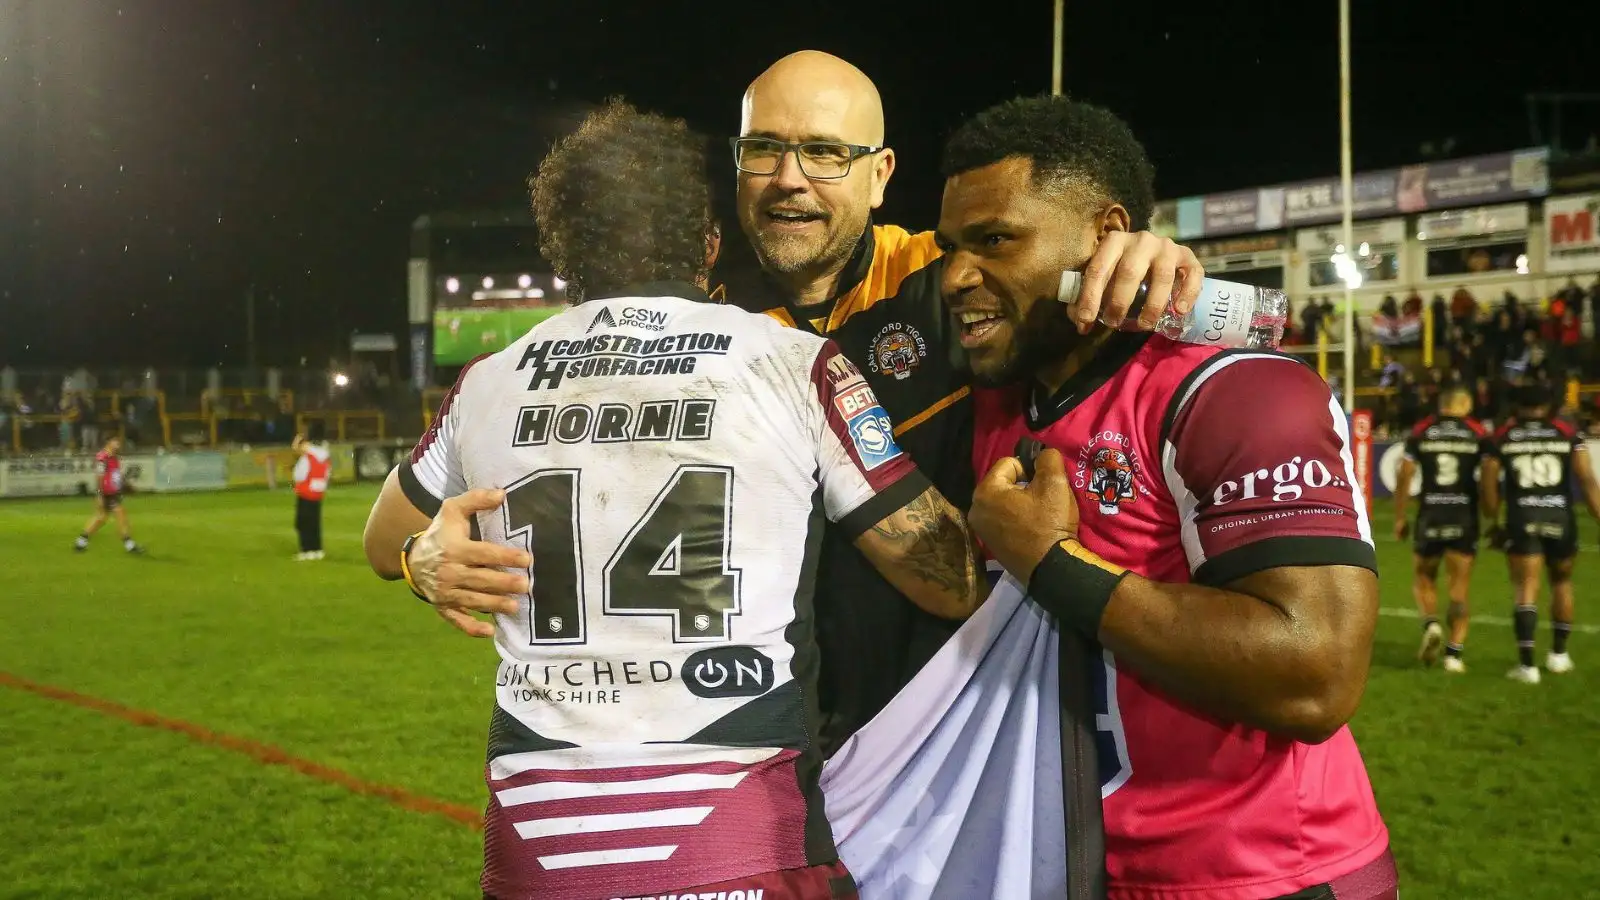 Castleford Tigers rise up place on all-time Super League table as full list revealed